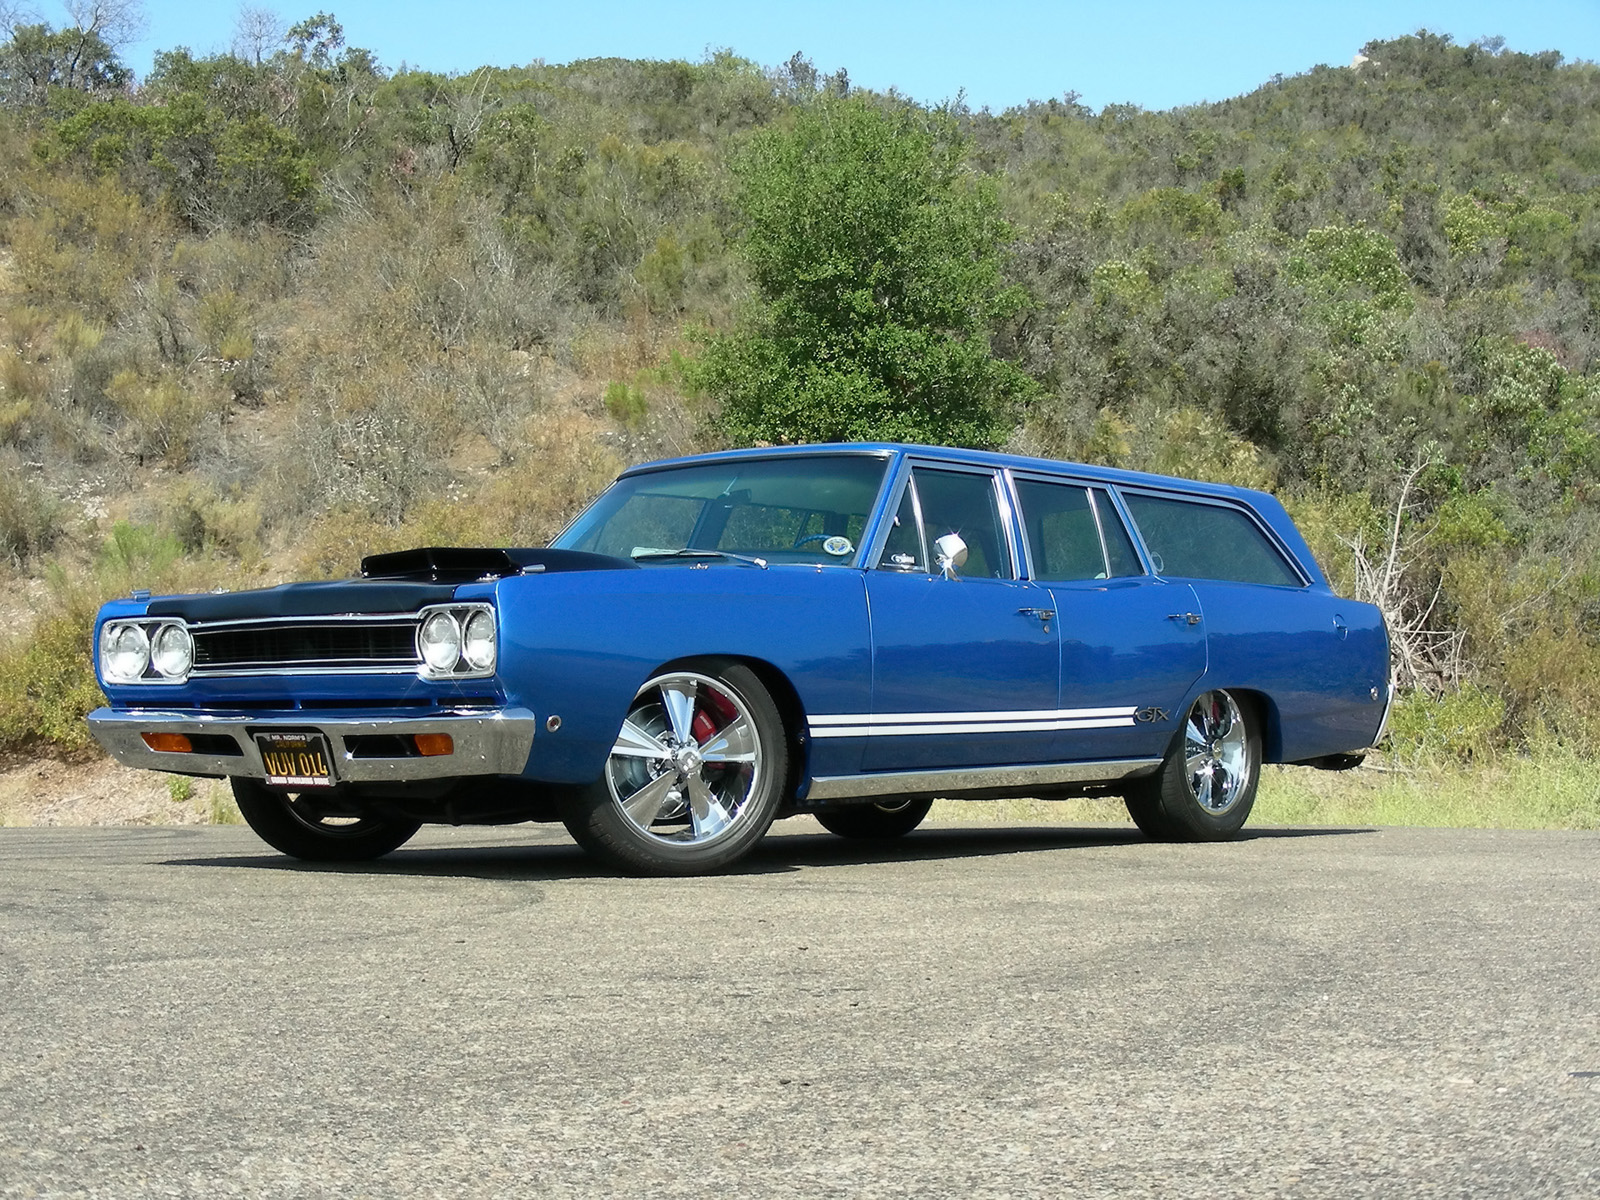 1968, Plymouth, Gtx, 440, Six pack, Stationwagon, Classic, Muscle, Tuning, Hot, Rod, Rods Wallpaper